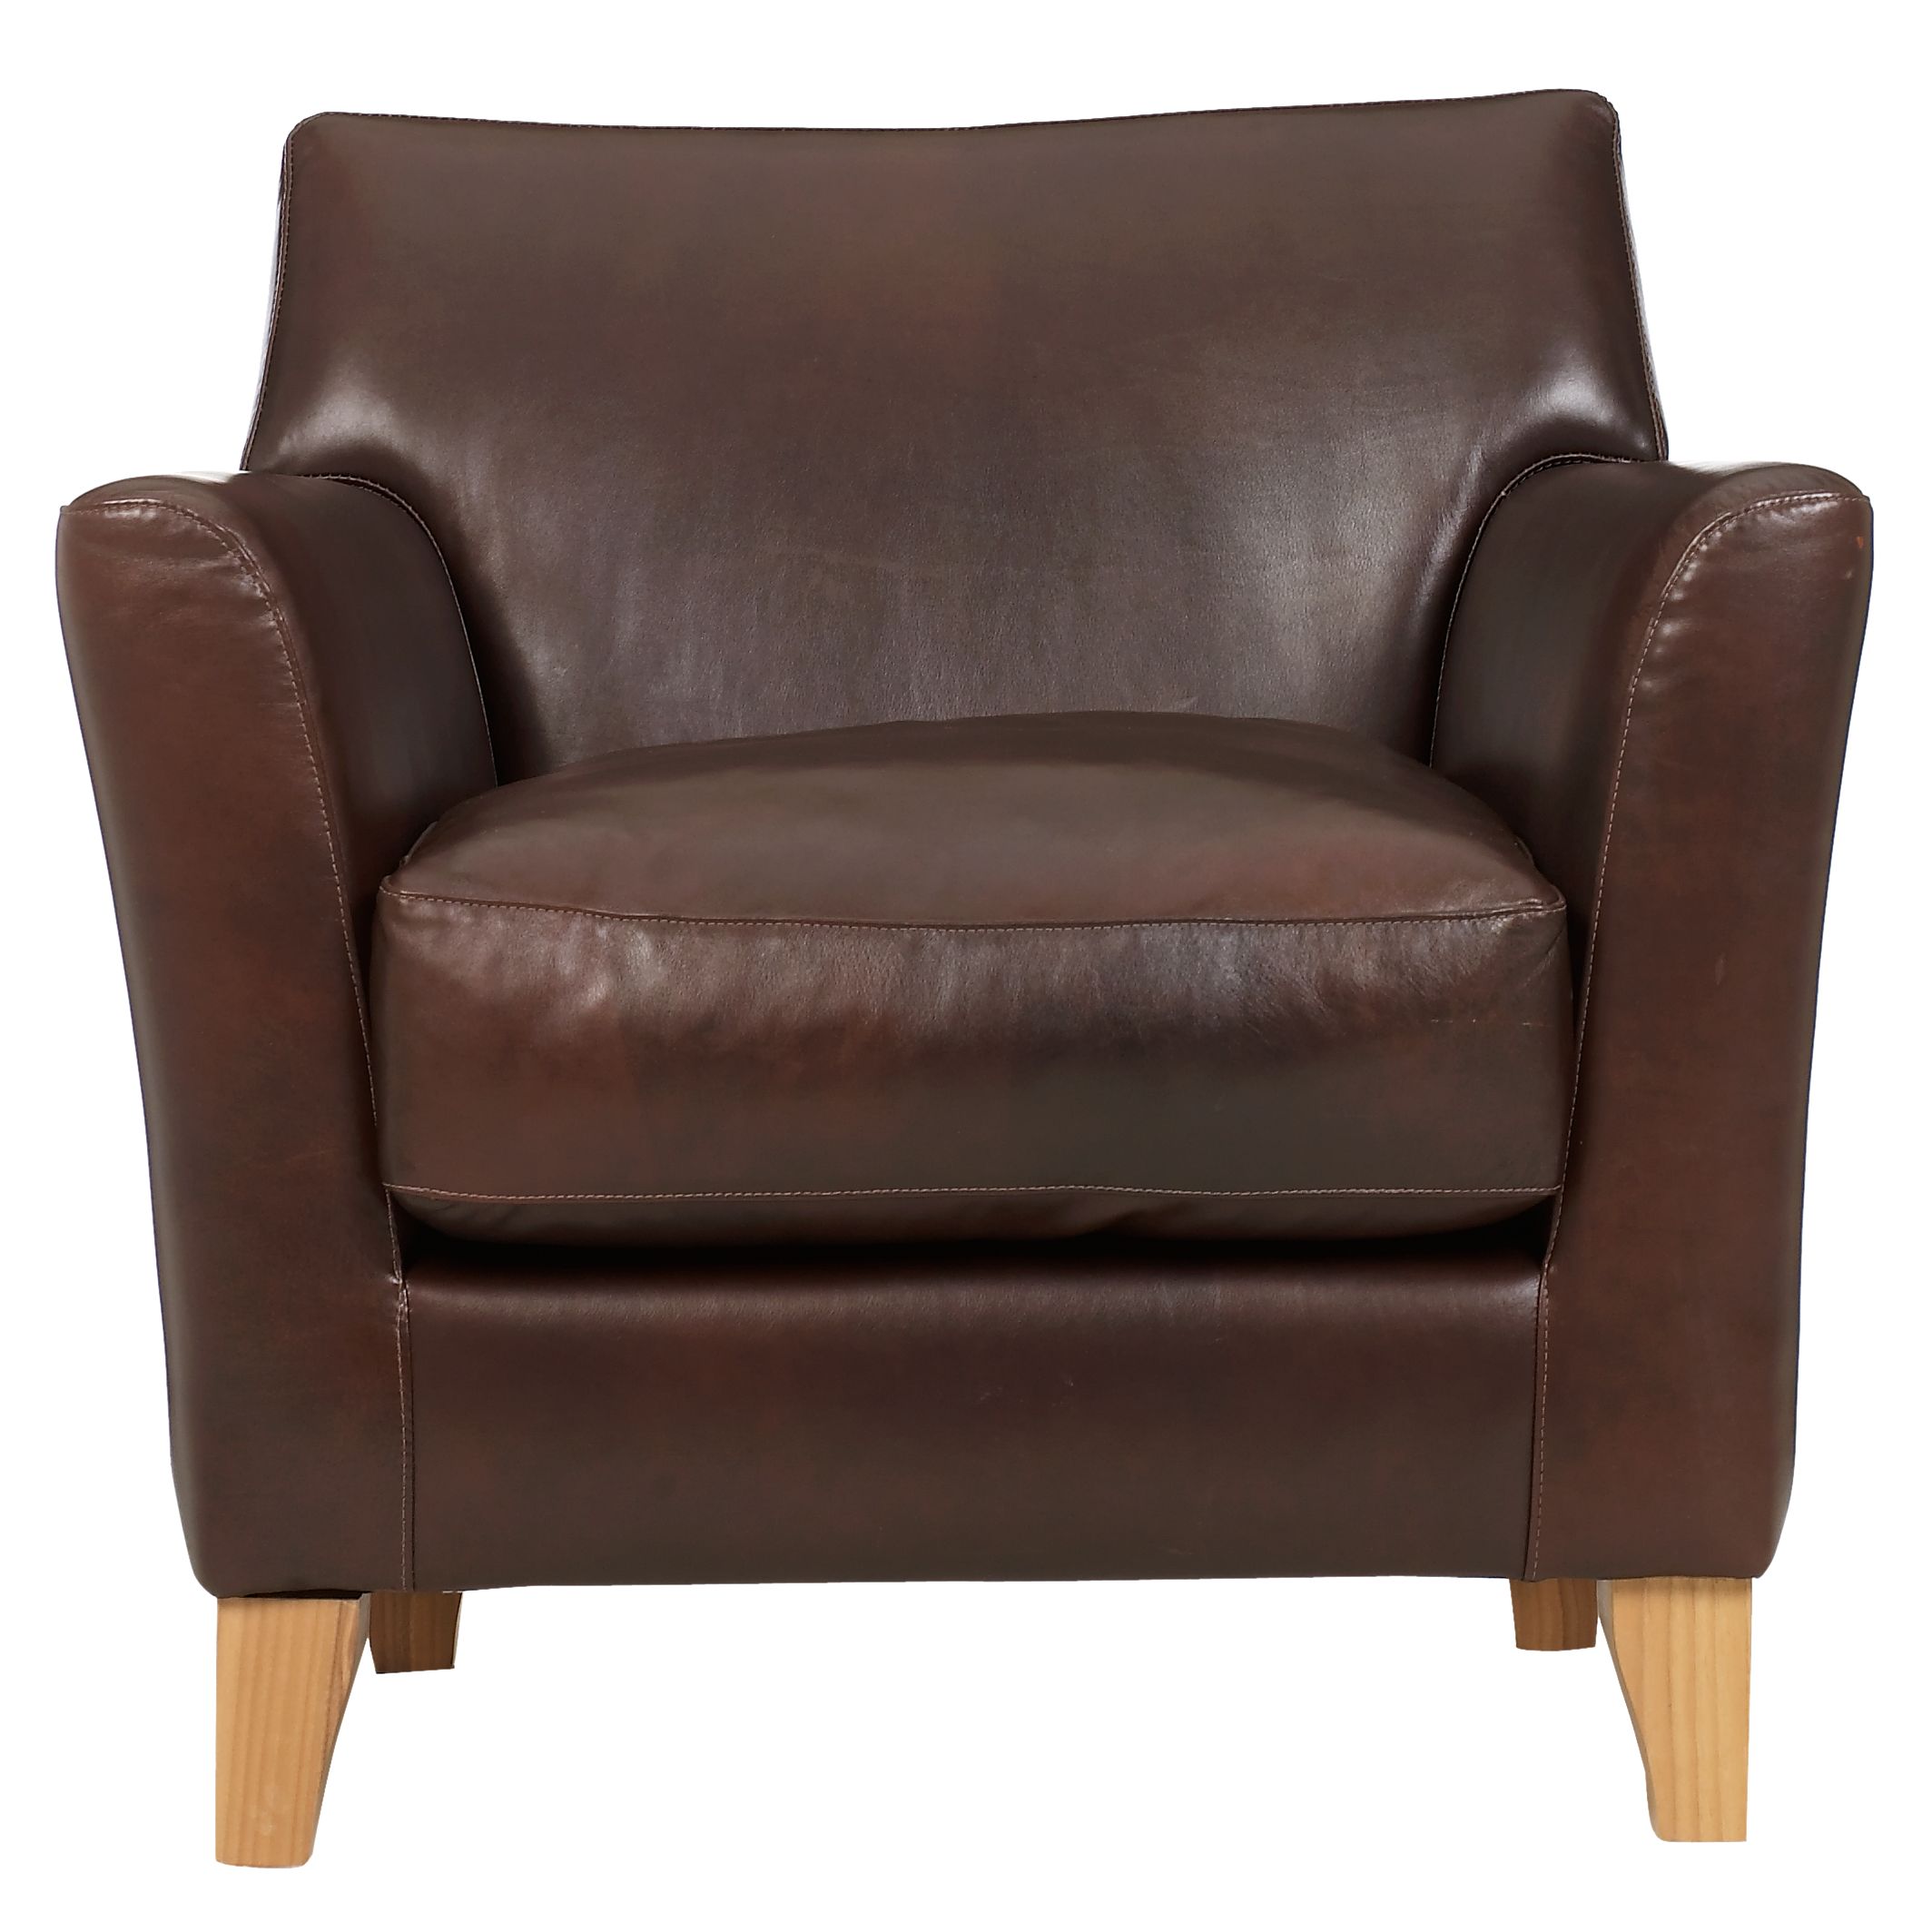 Nick Munro Collection Leather Armchair, Old Saddle Walnut at John Lewis